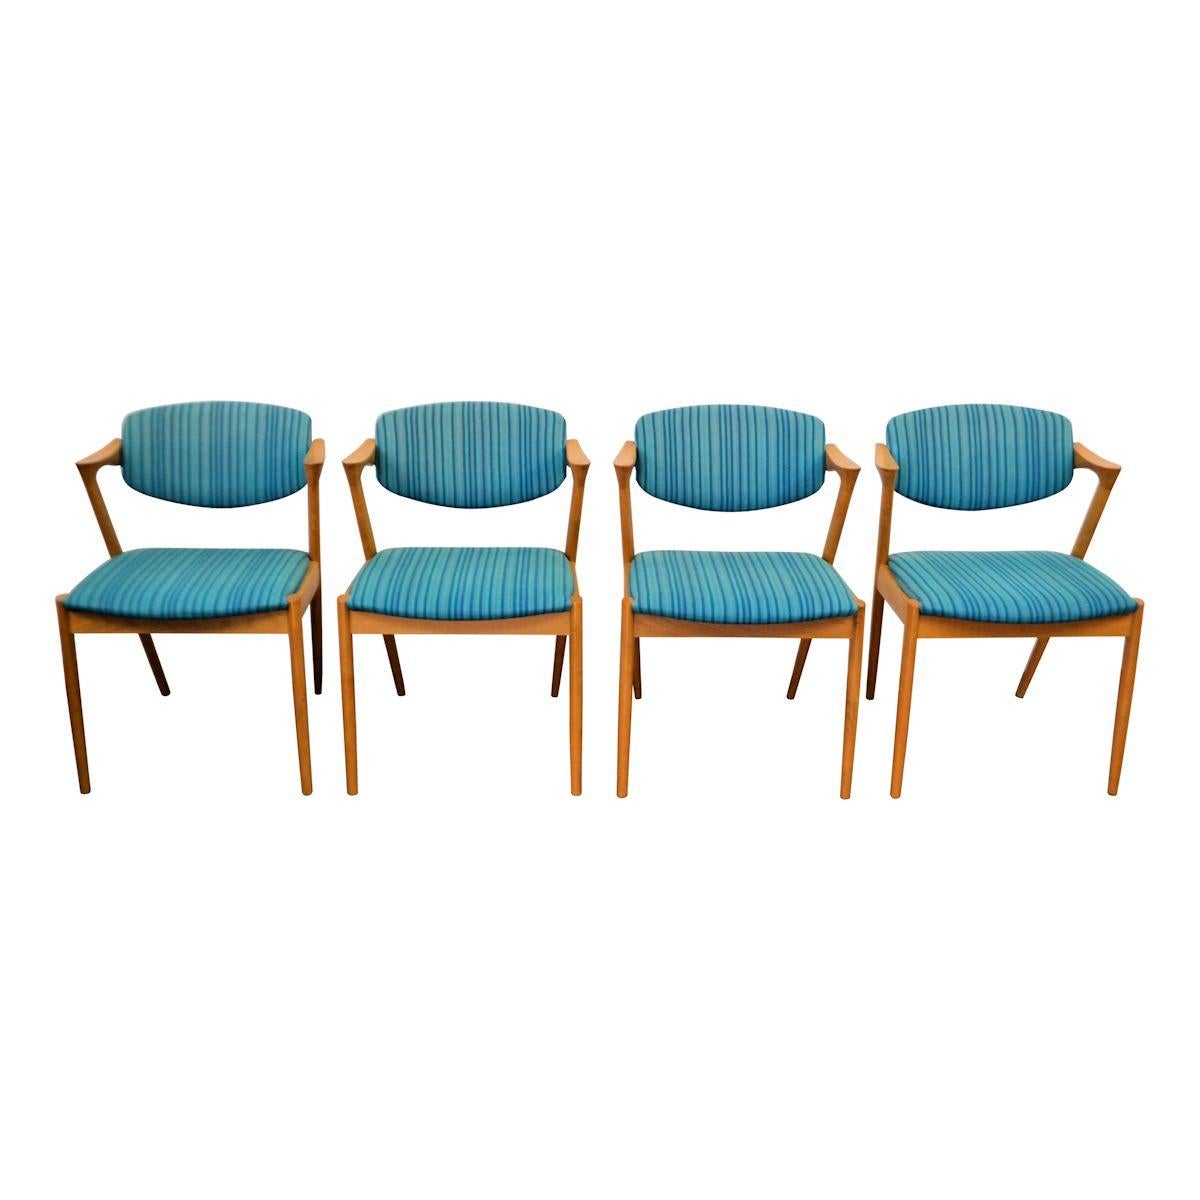 Set of four Danish modern model #42 dining chairs designed by Kai Kristiansen for Schou Andersen SVA Møbler. The iconic model #42, also known as the “Z chair”, offers a great level of comfort by way of its pivoting backrest. The chairs feature solid